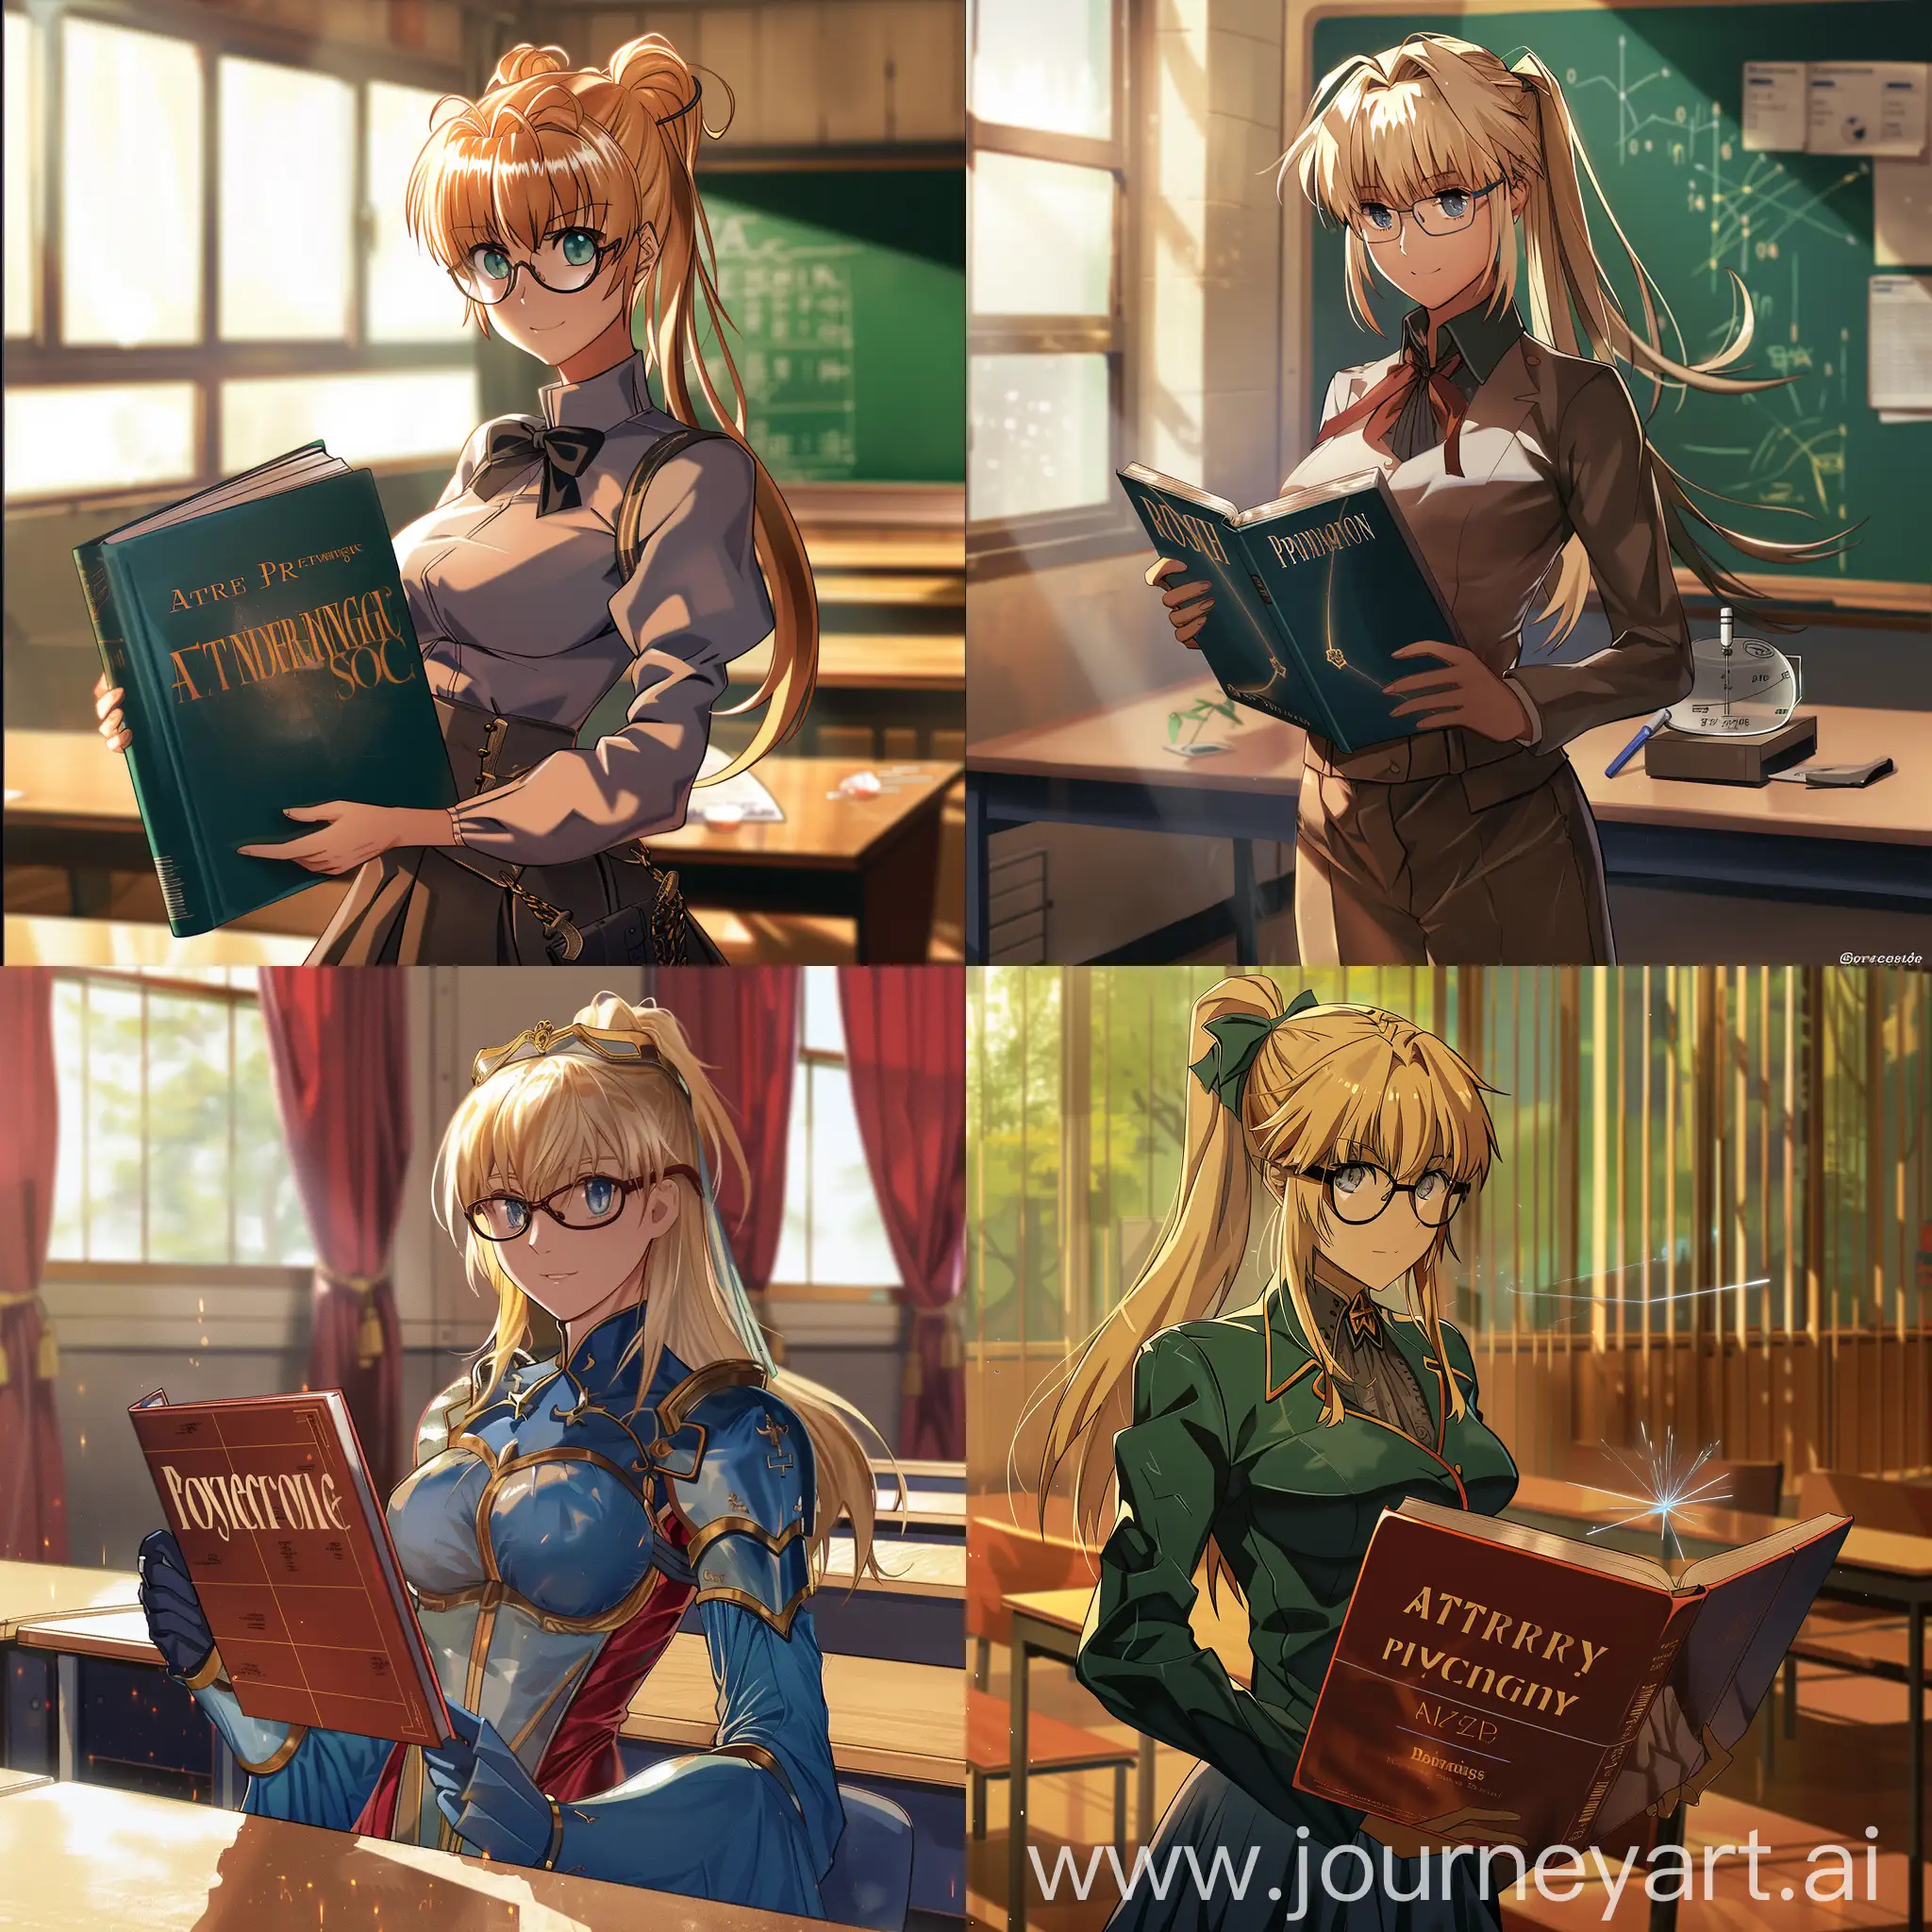 Saber Artoria Pendragon from Fate Zero; in a physics class; dressed in a teacher's outfit with glasses; with a physics textbook in her hands;